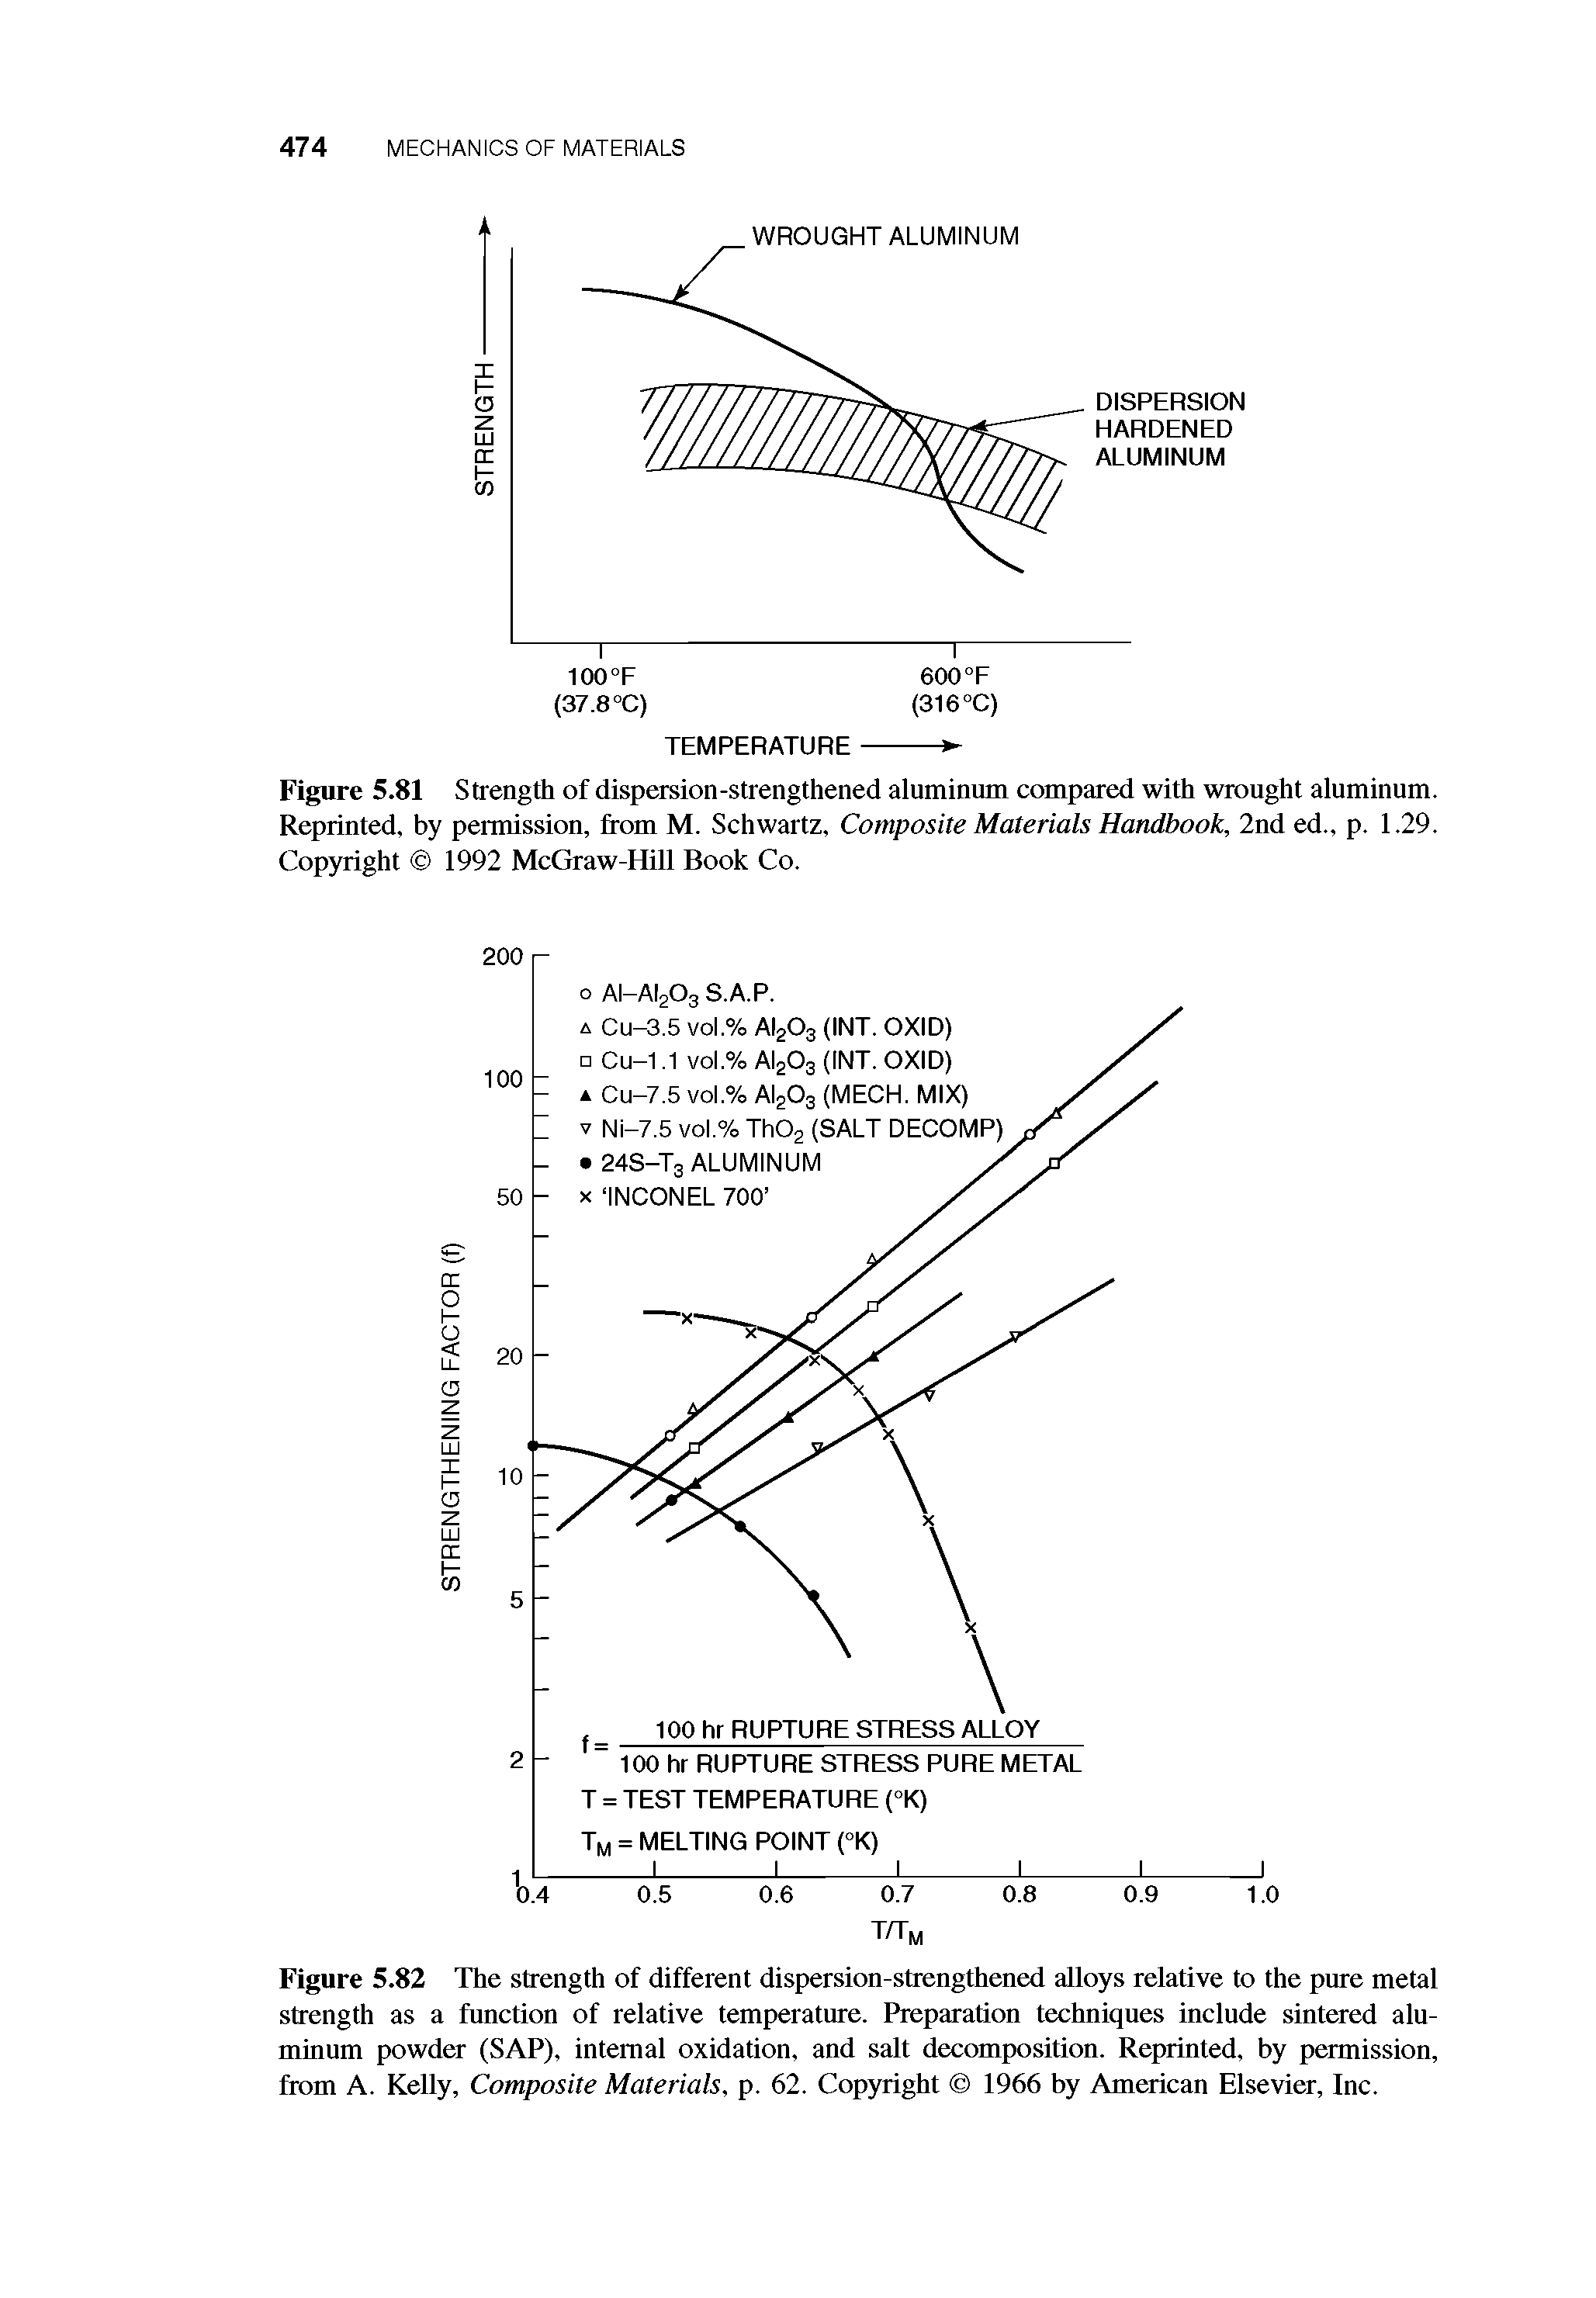 Figure 5.81 Strength of dispersion-strengthened aluminnm compared with wronght aluminum. Reprinted, by permission, from M. Schwartz, Composite Materials Handbook, 2nd ed., p. 1.29. Copyright 1992 McGraw-Hill Book Co.